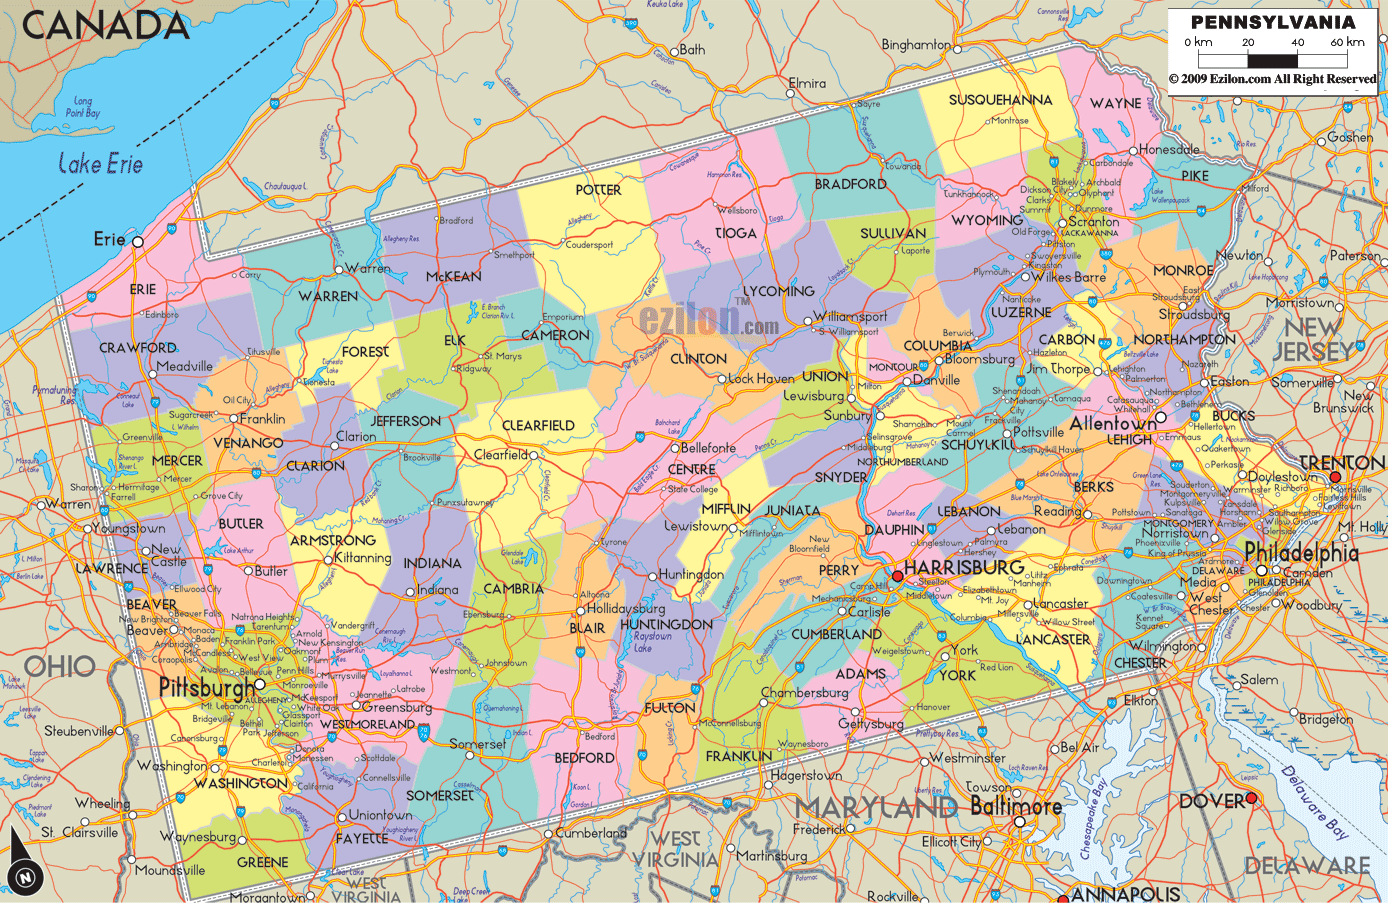 eastern pa map with cities